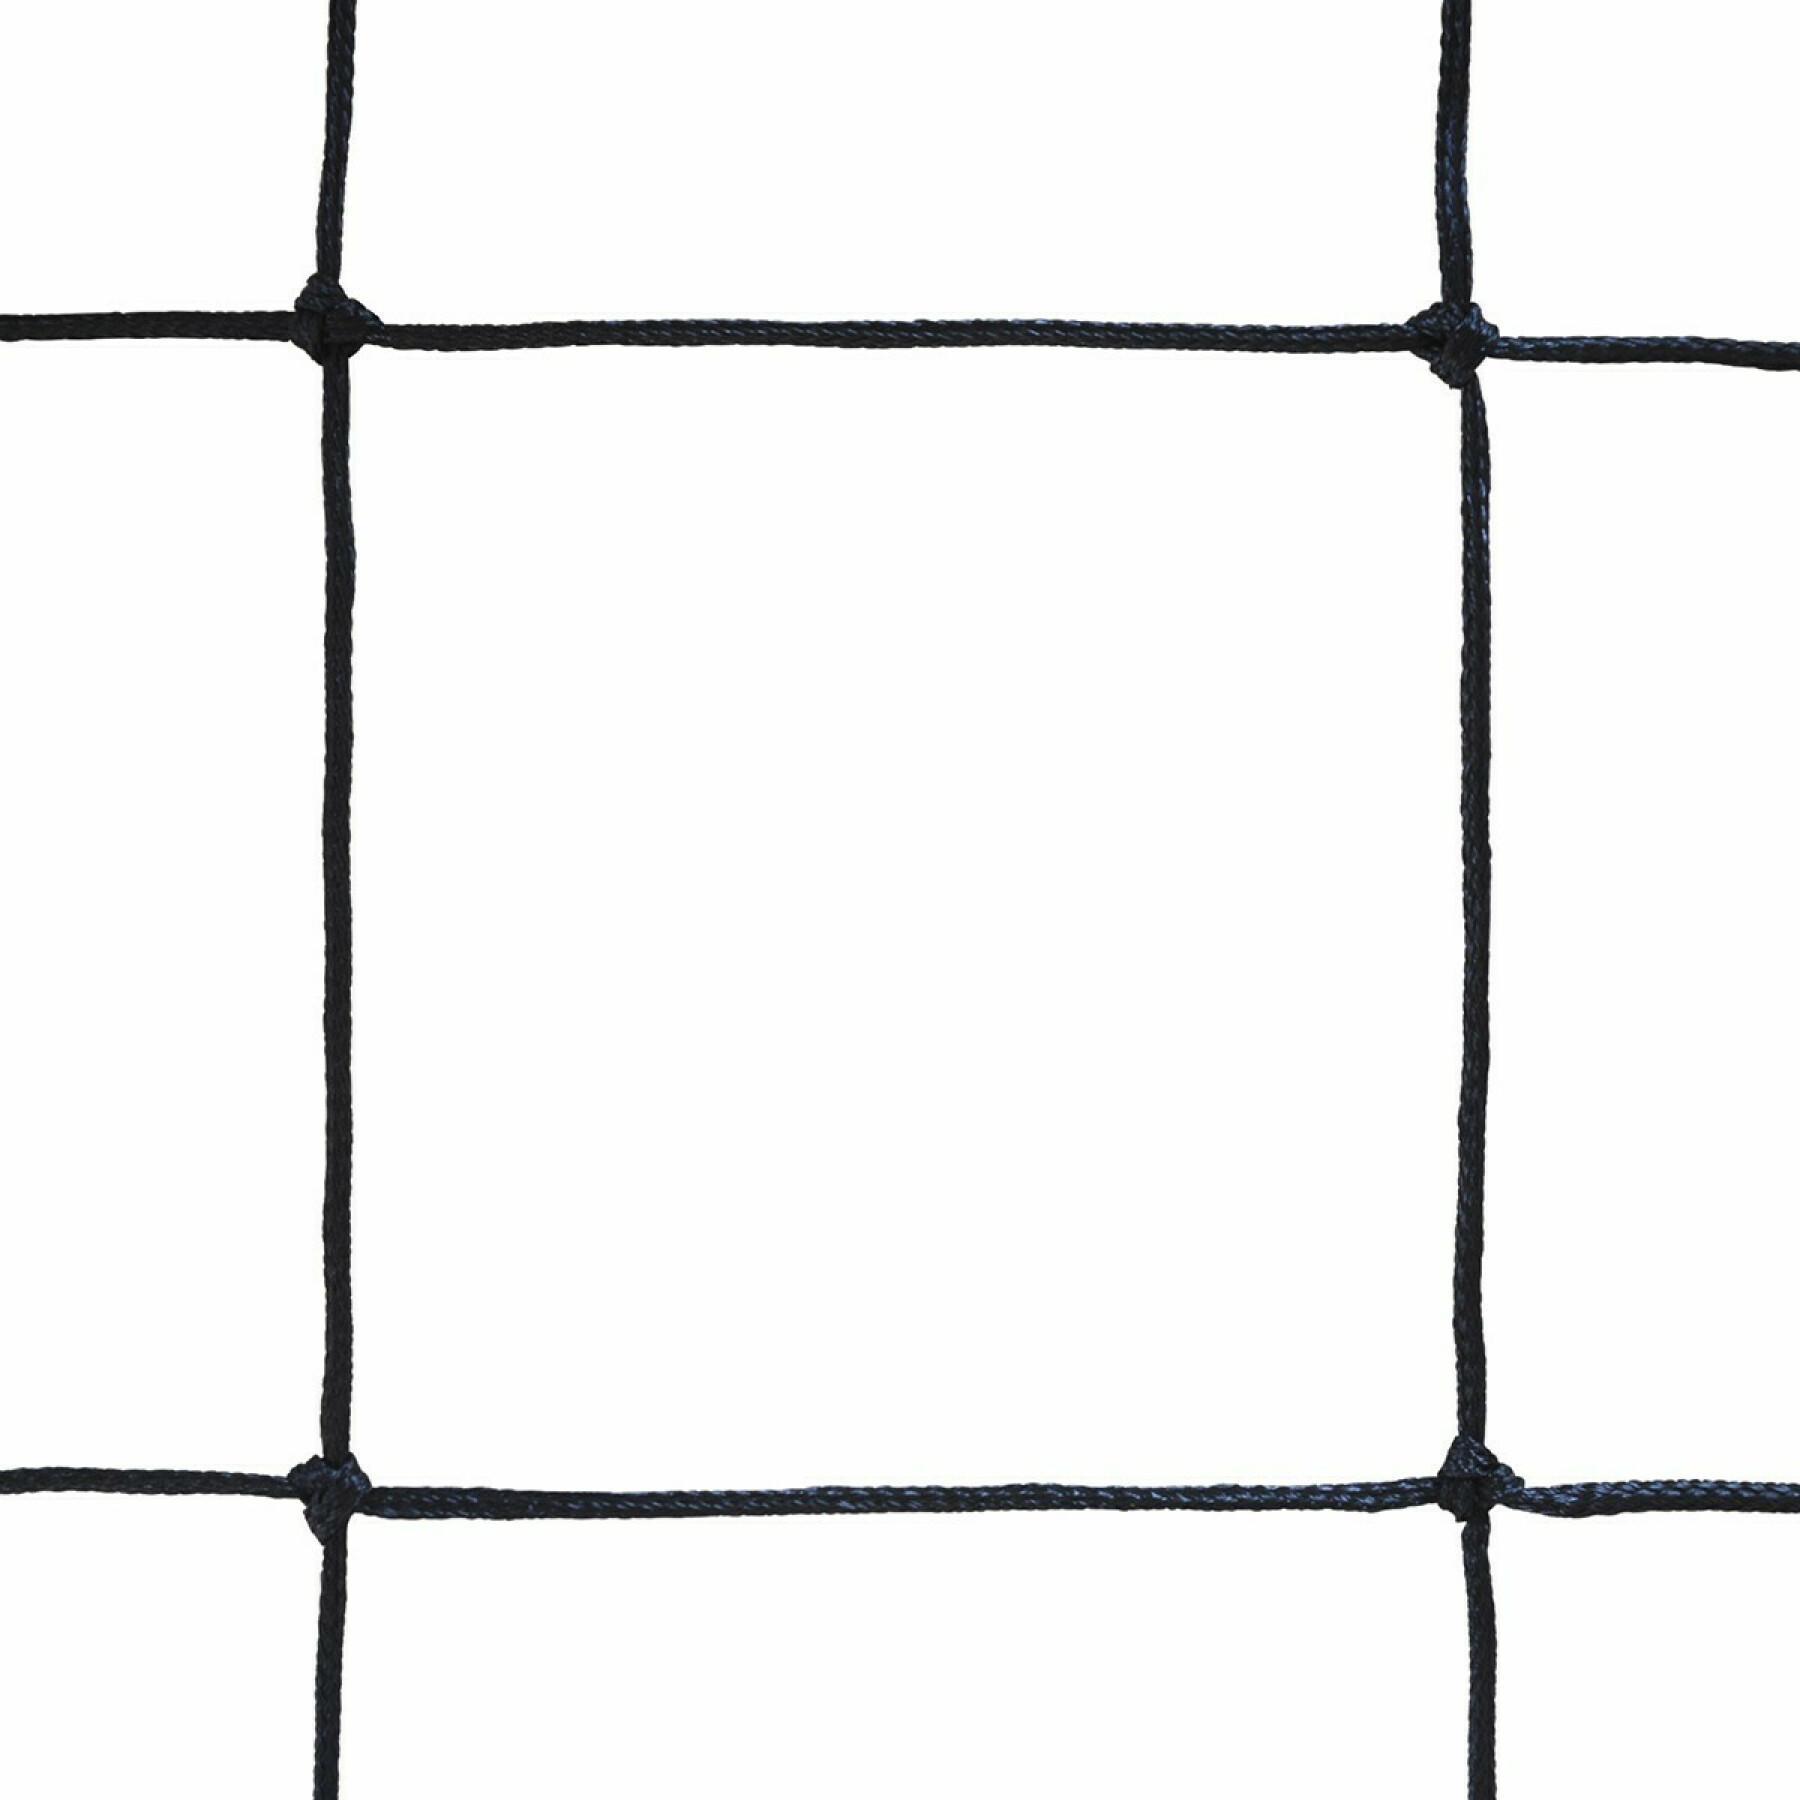 8-piece goal net transportable in pairs